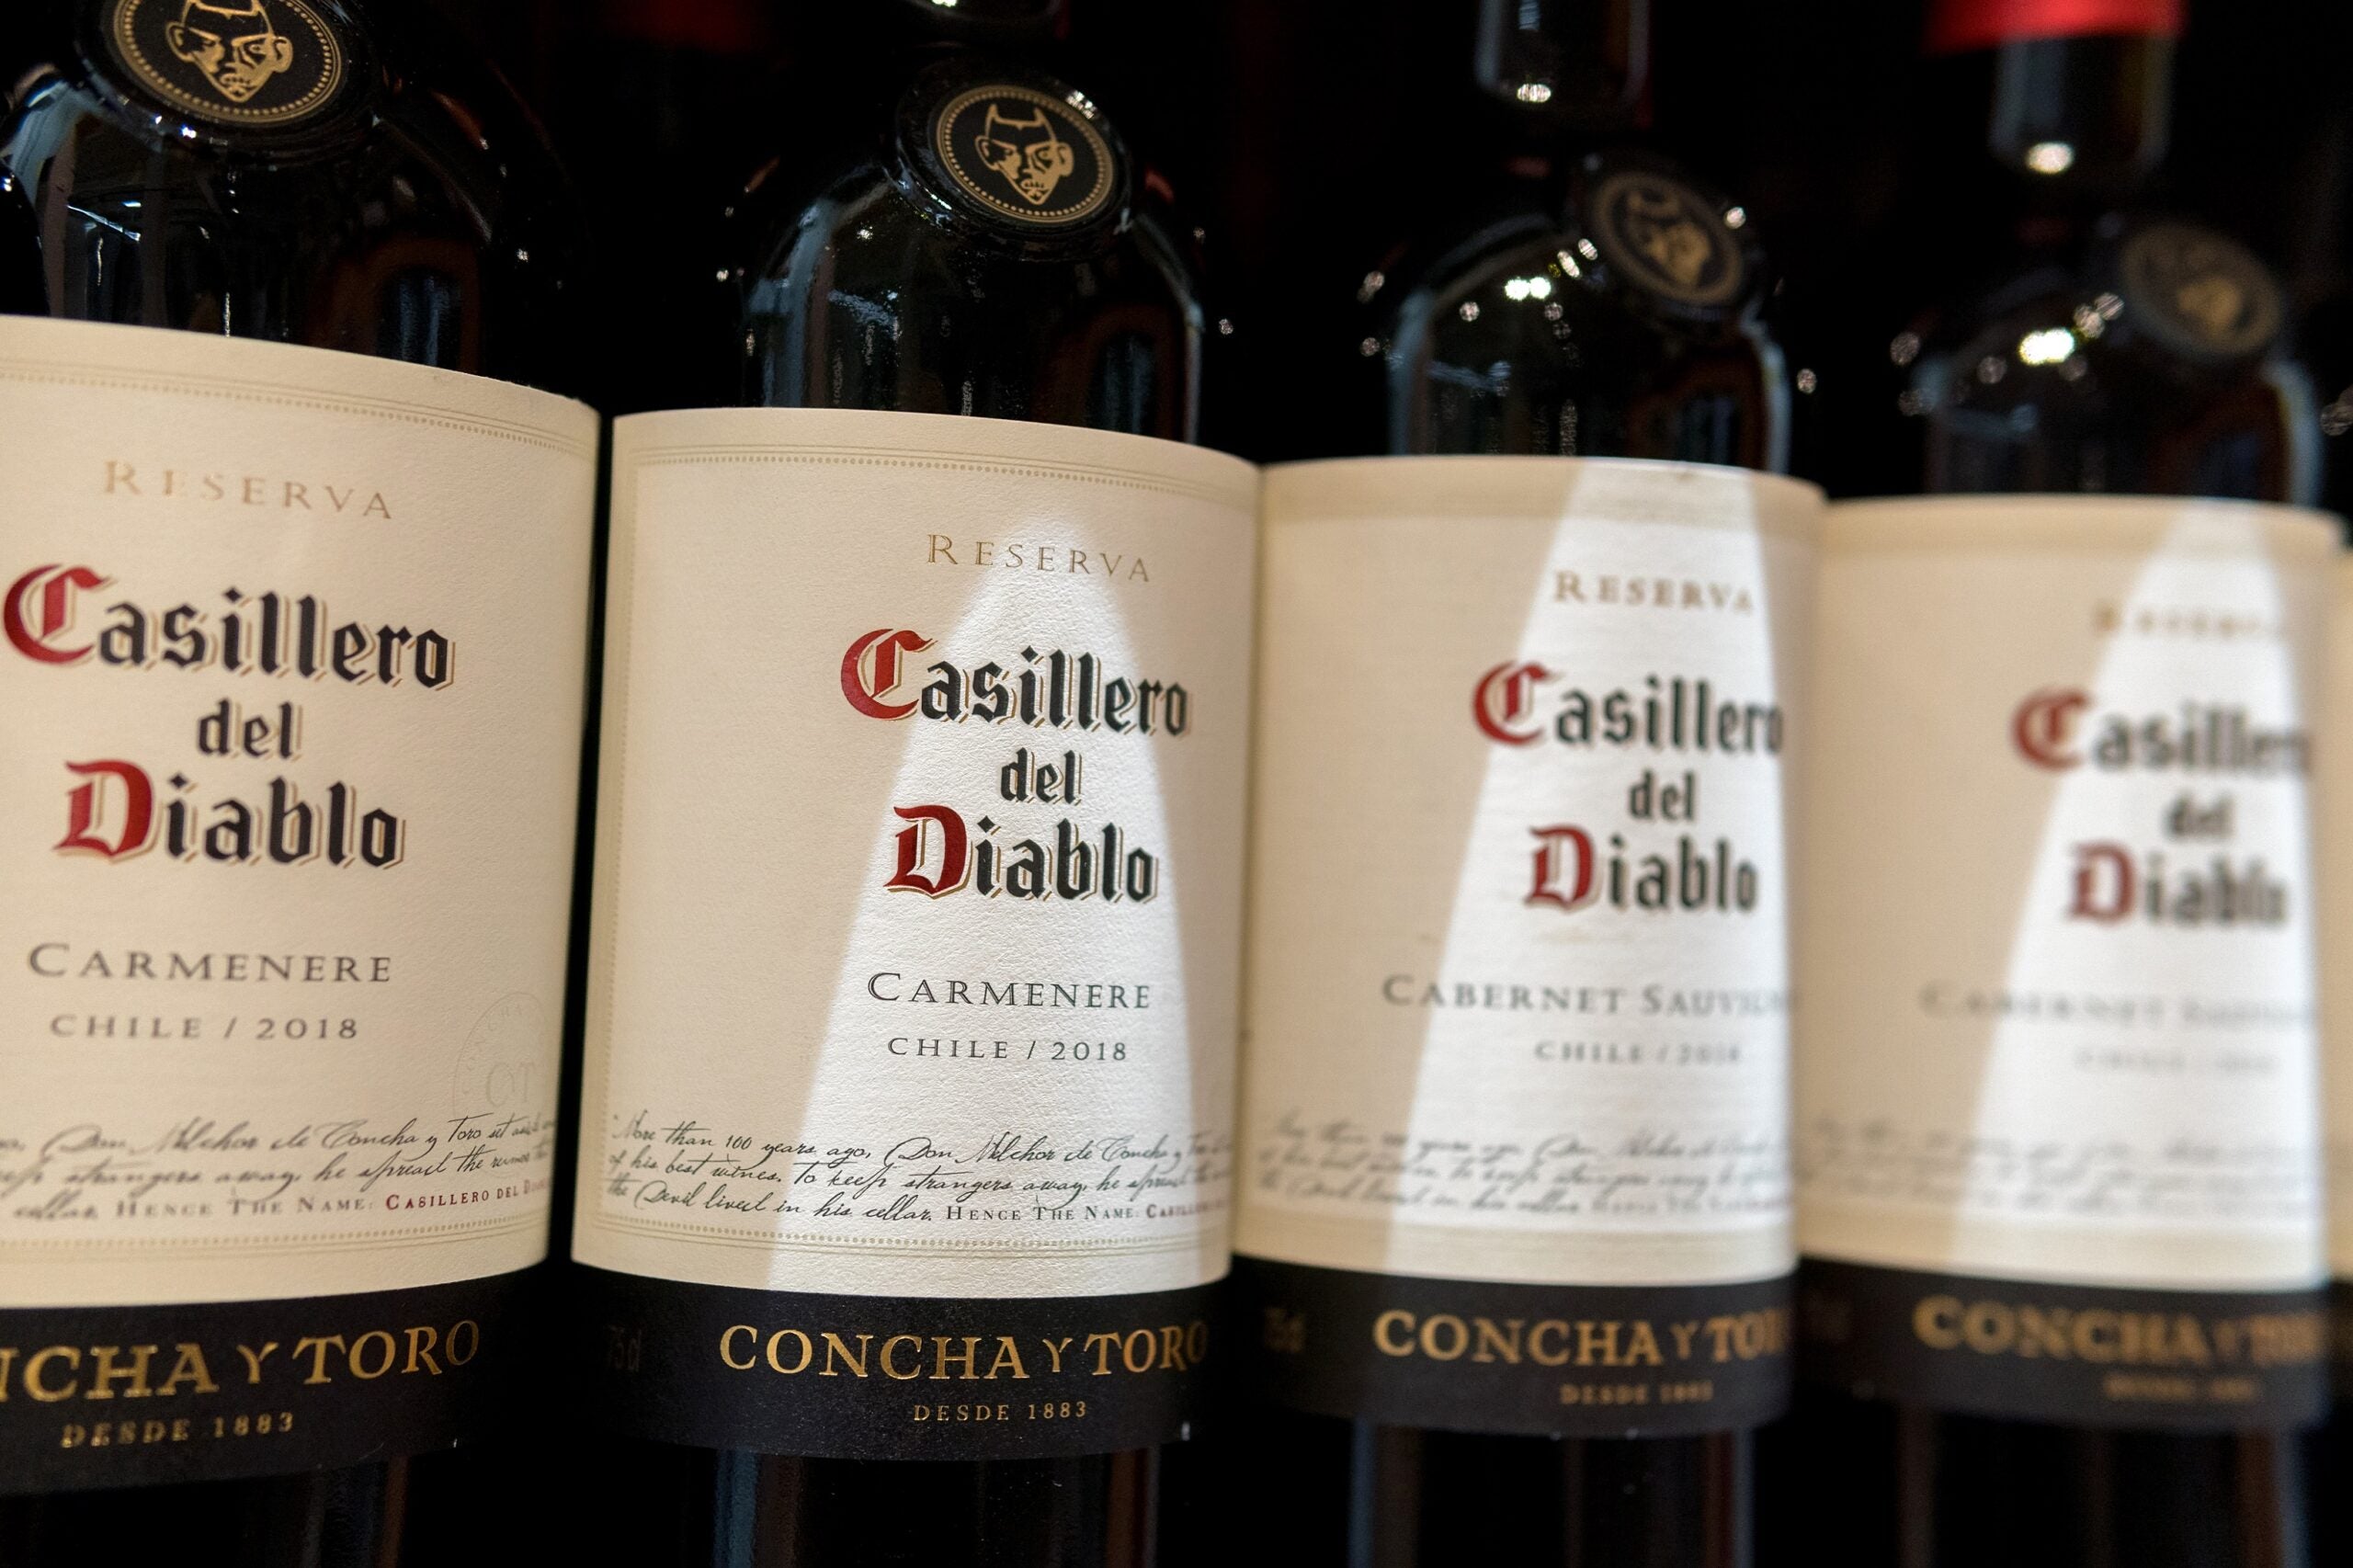 “Retailers cannot afford to sell wine at low prices forever” – Concha y Toro on weaning UK wine drinkers off promotions